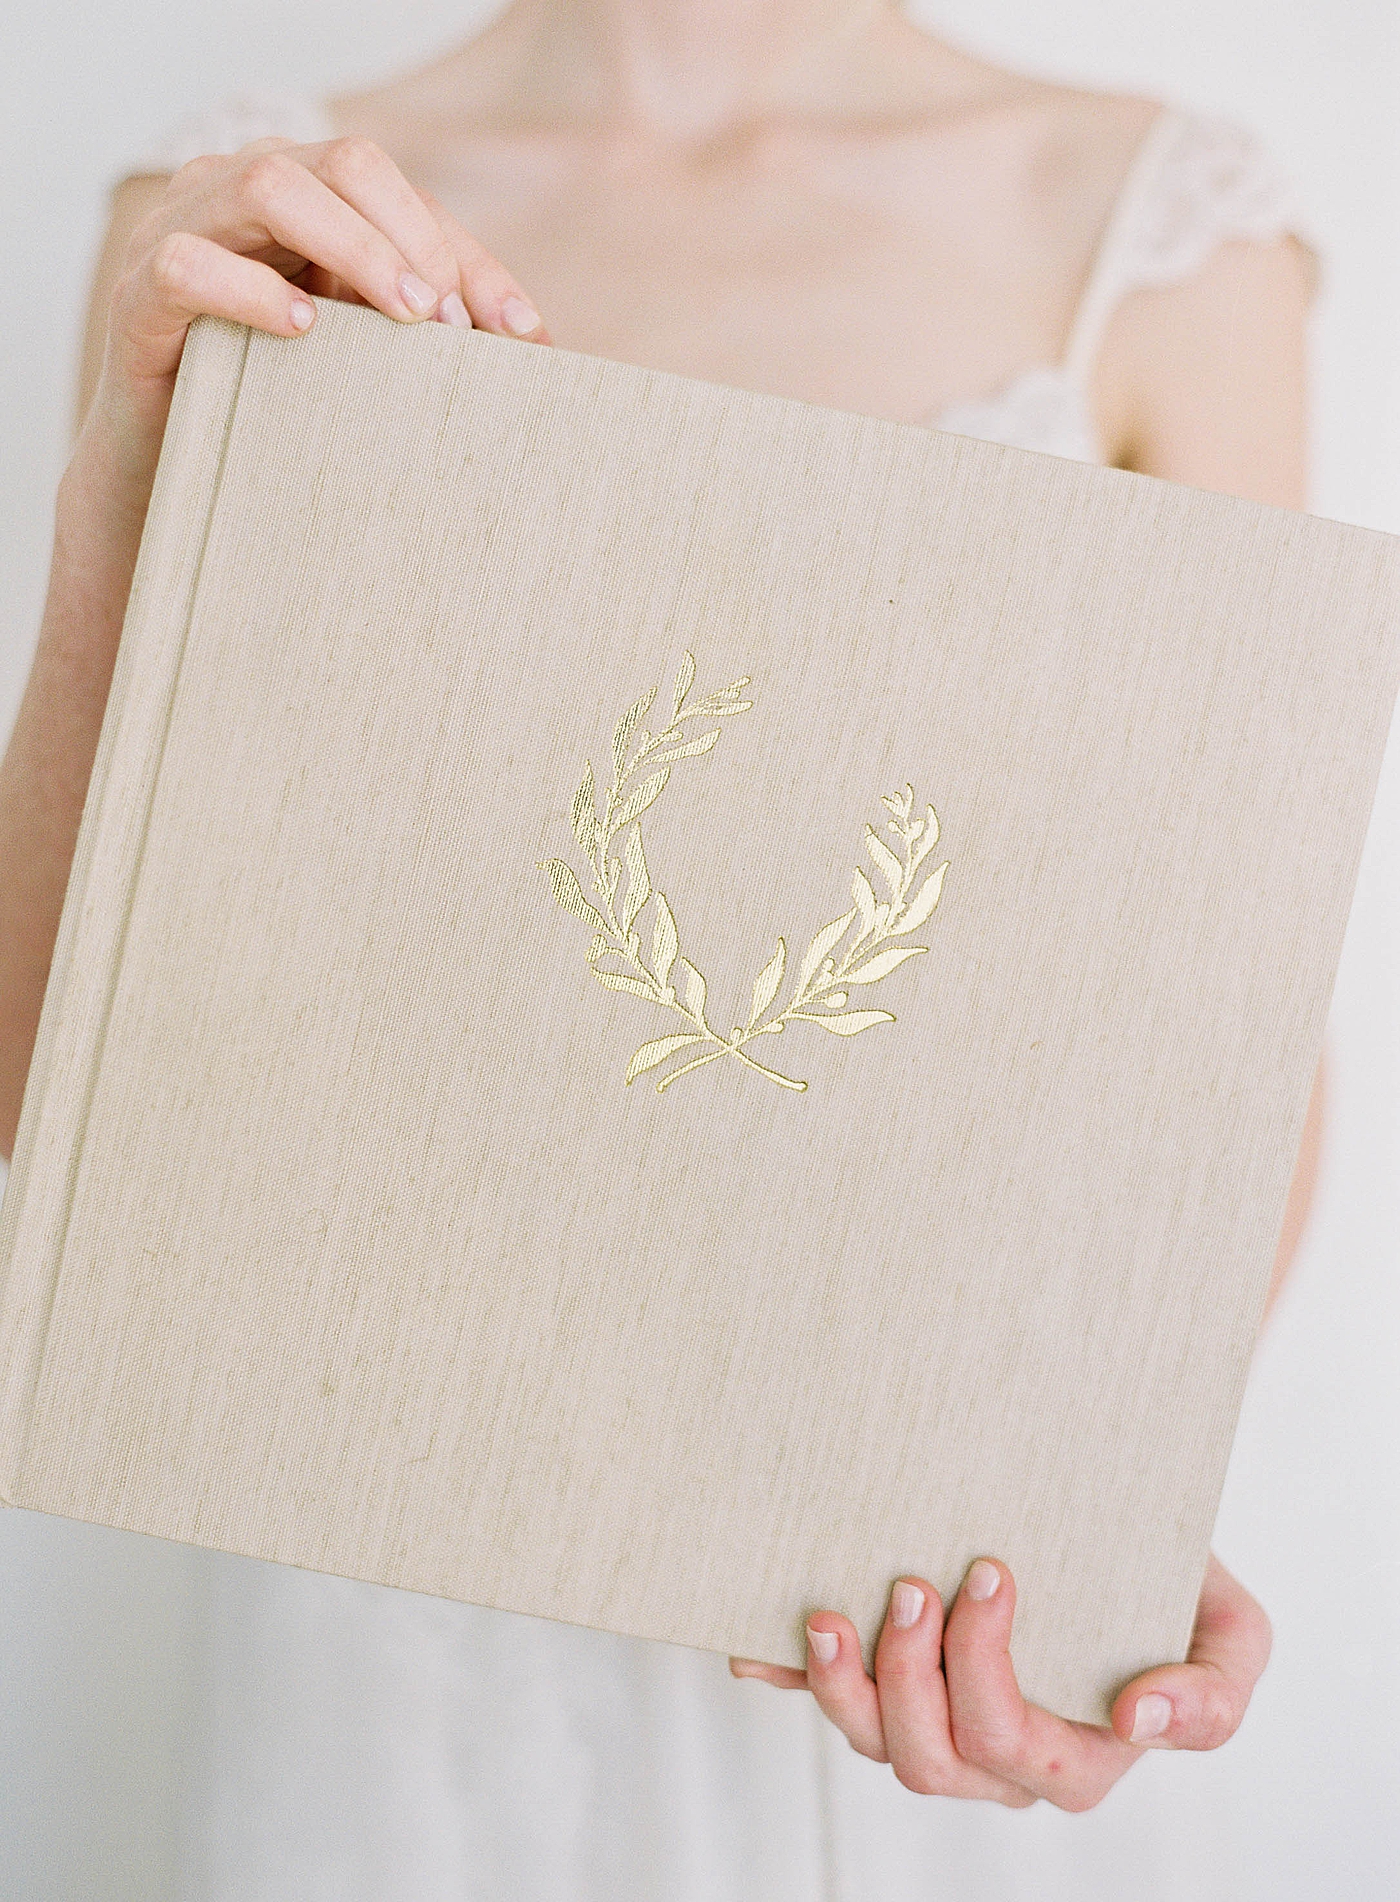 Neutral wedding album with gold detail held by woman in white dress | Fine Art Wedding Albums from Diane Sotero 